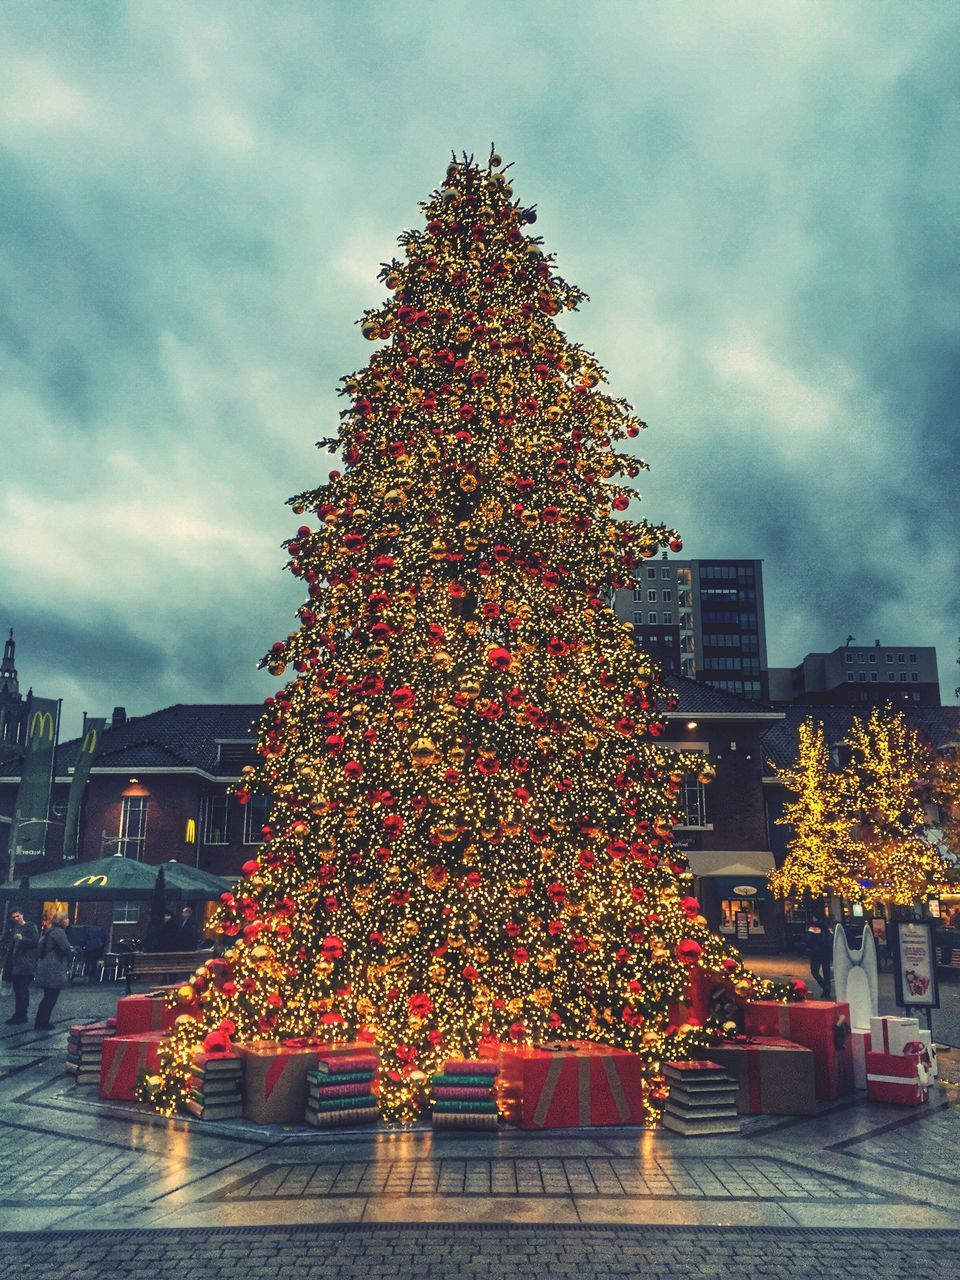 illuminated, building exterior, architecture, sky, built structure, celebration, night, christmas, christmas tree, christmas decoration, decoration, city, cloud - sky, low angle view, tree, lighting equipment, tradition, christmas lights, cloudy, outdoors